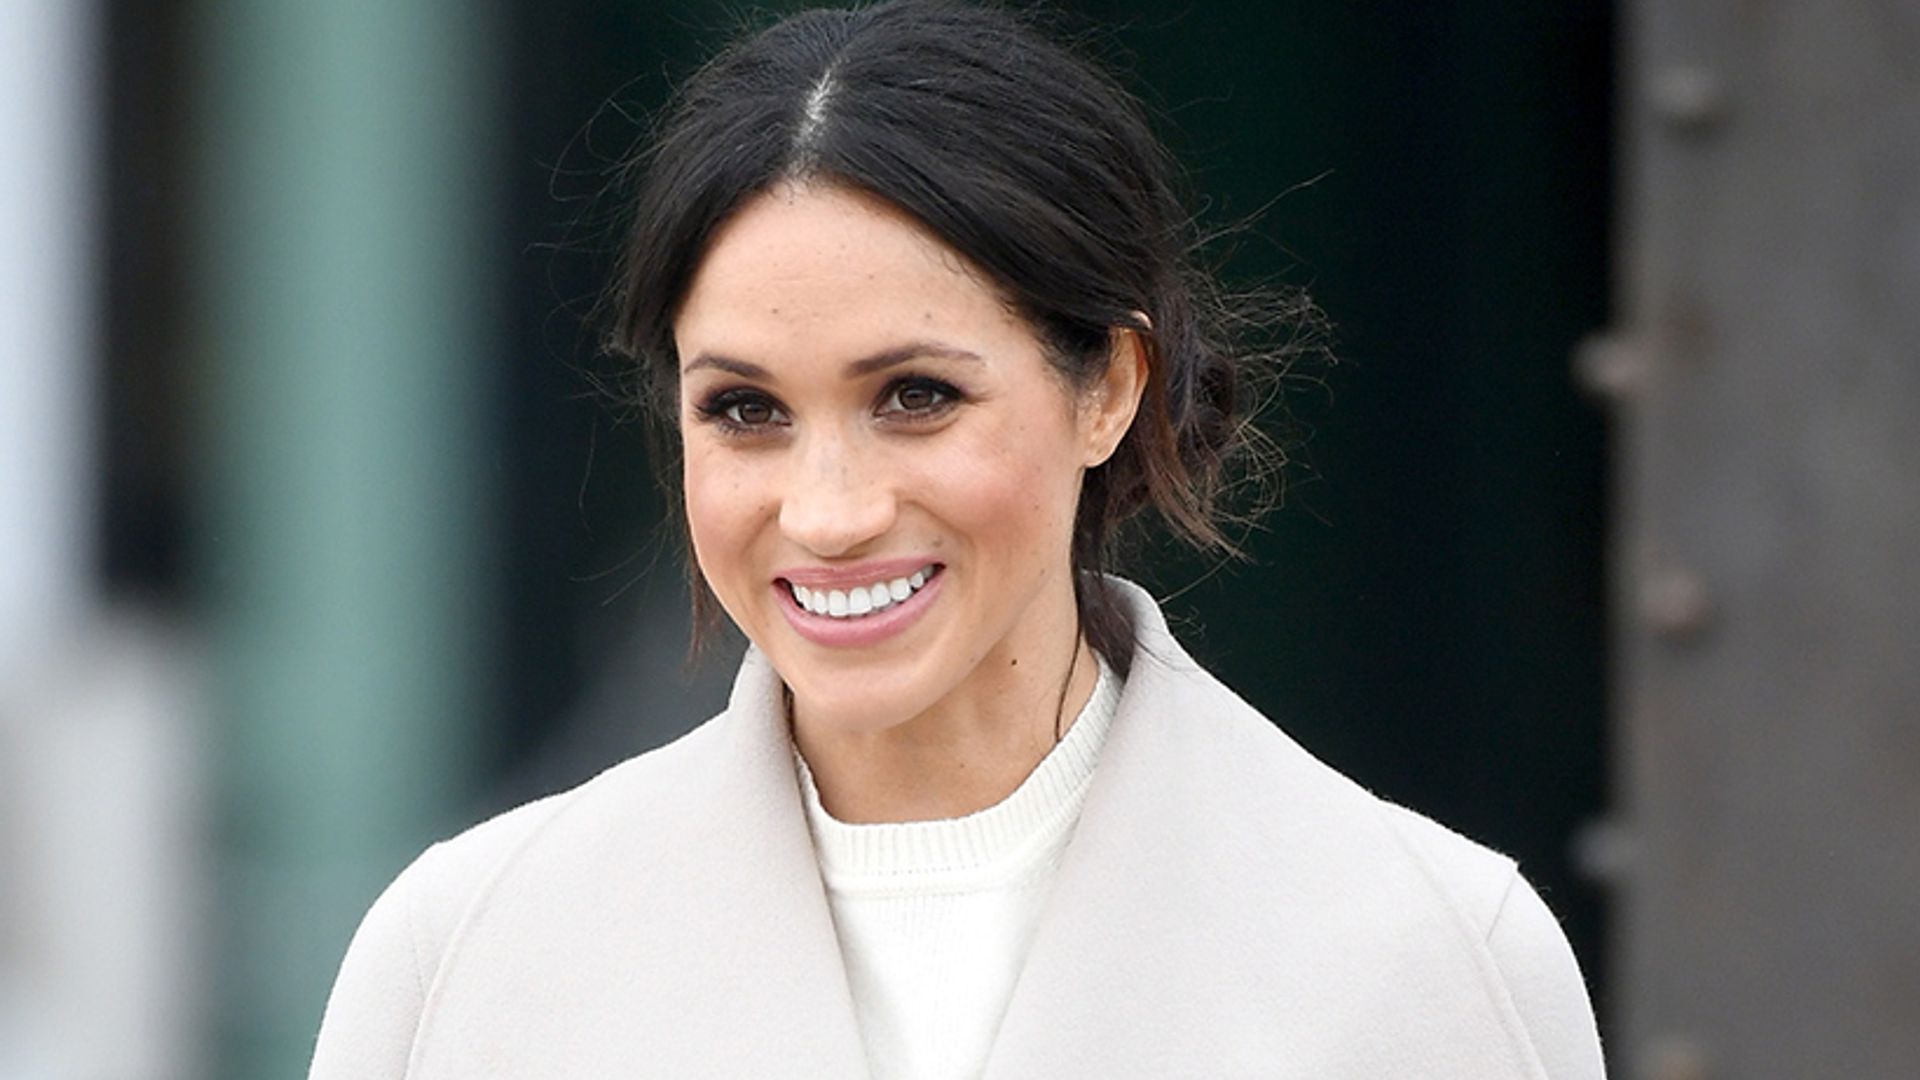 This is the wedding ring Meghan Markle will wear - and it sounds BEAUTIFUL